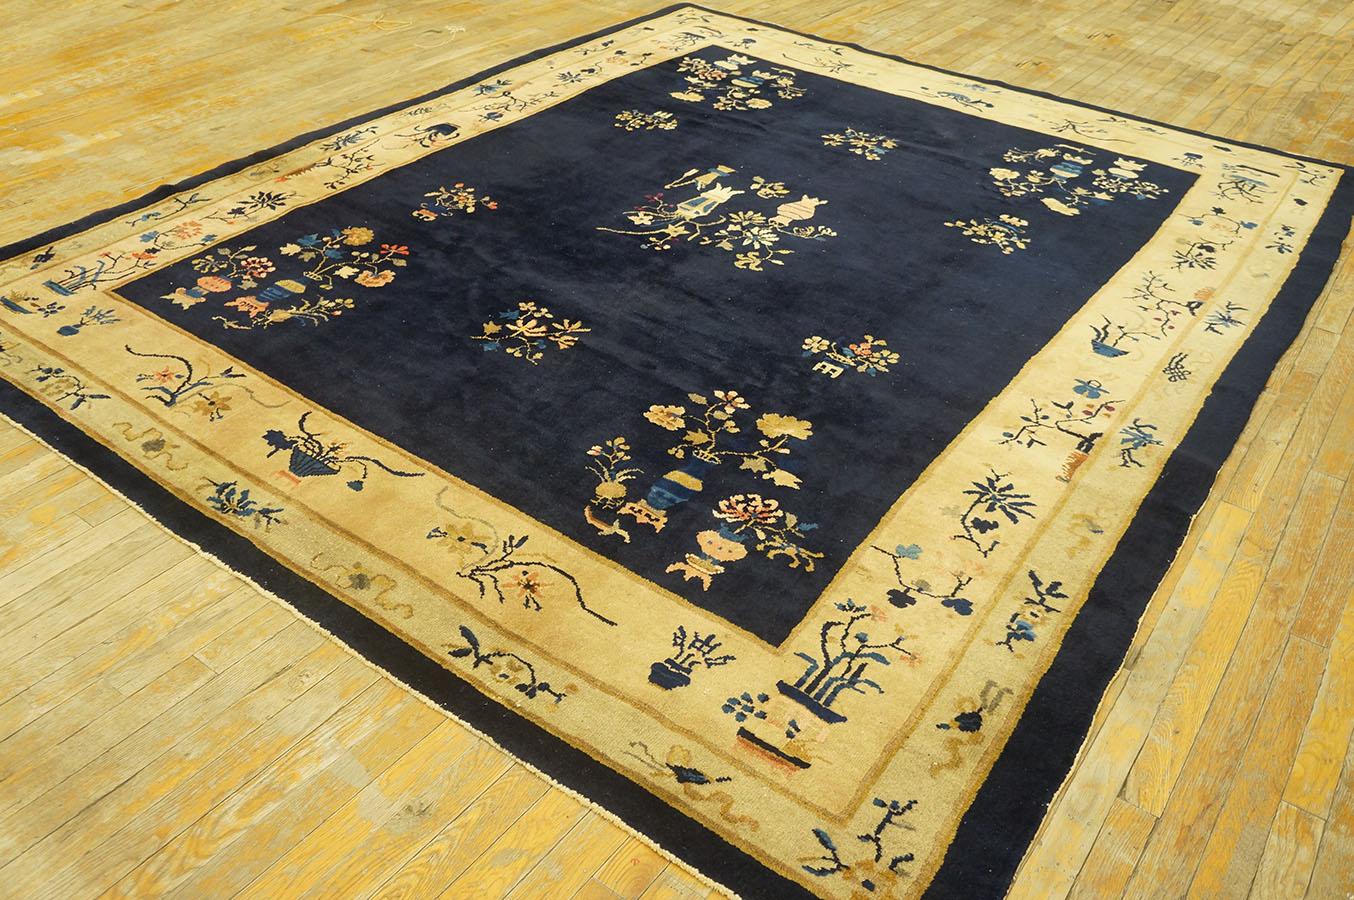 Antique Chinese rug, Size:7' 9'' x 9' 6''.